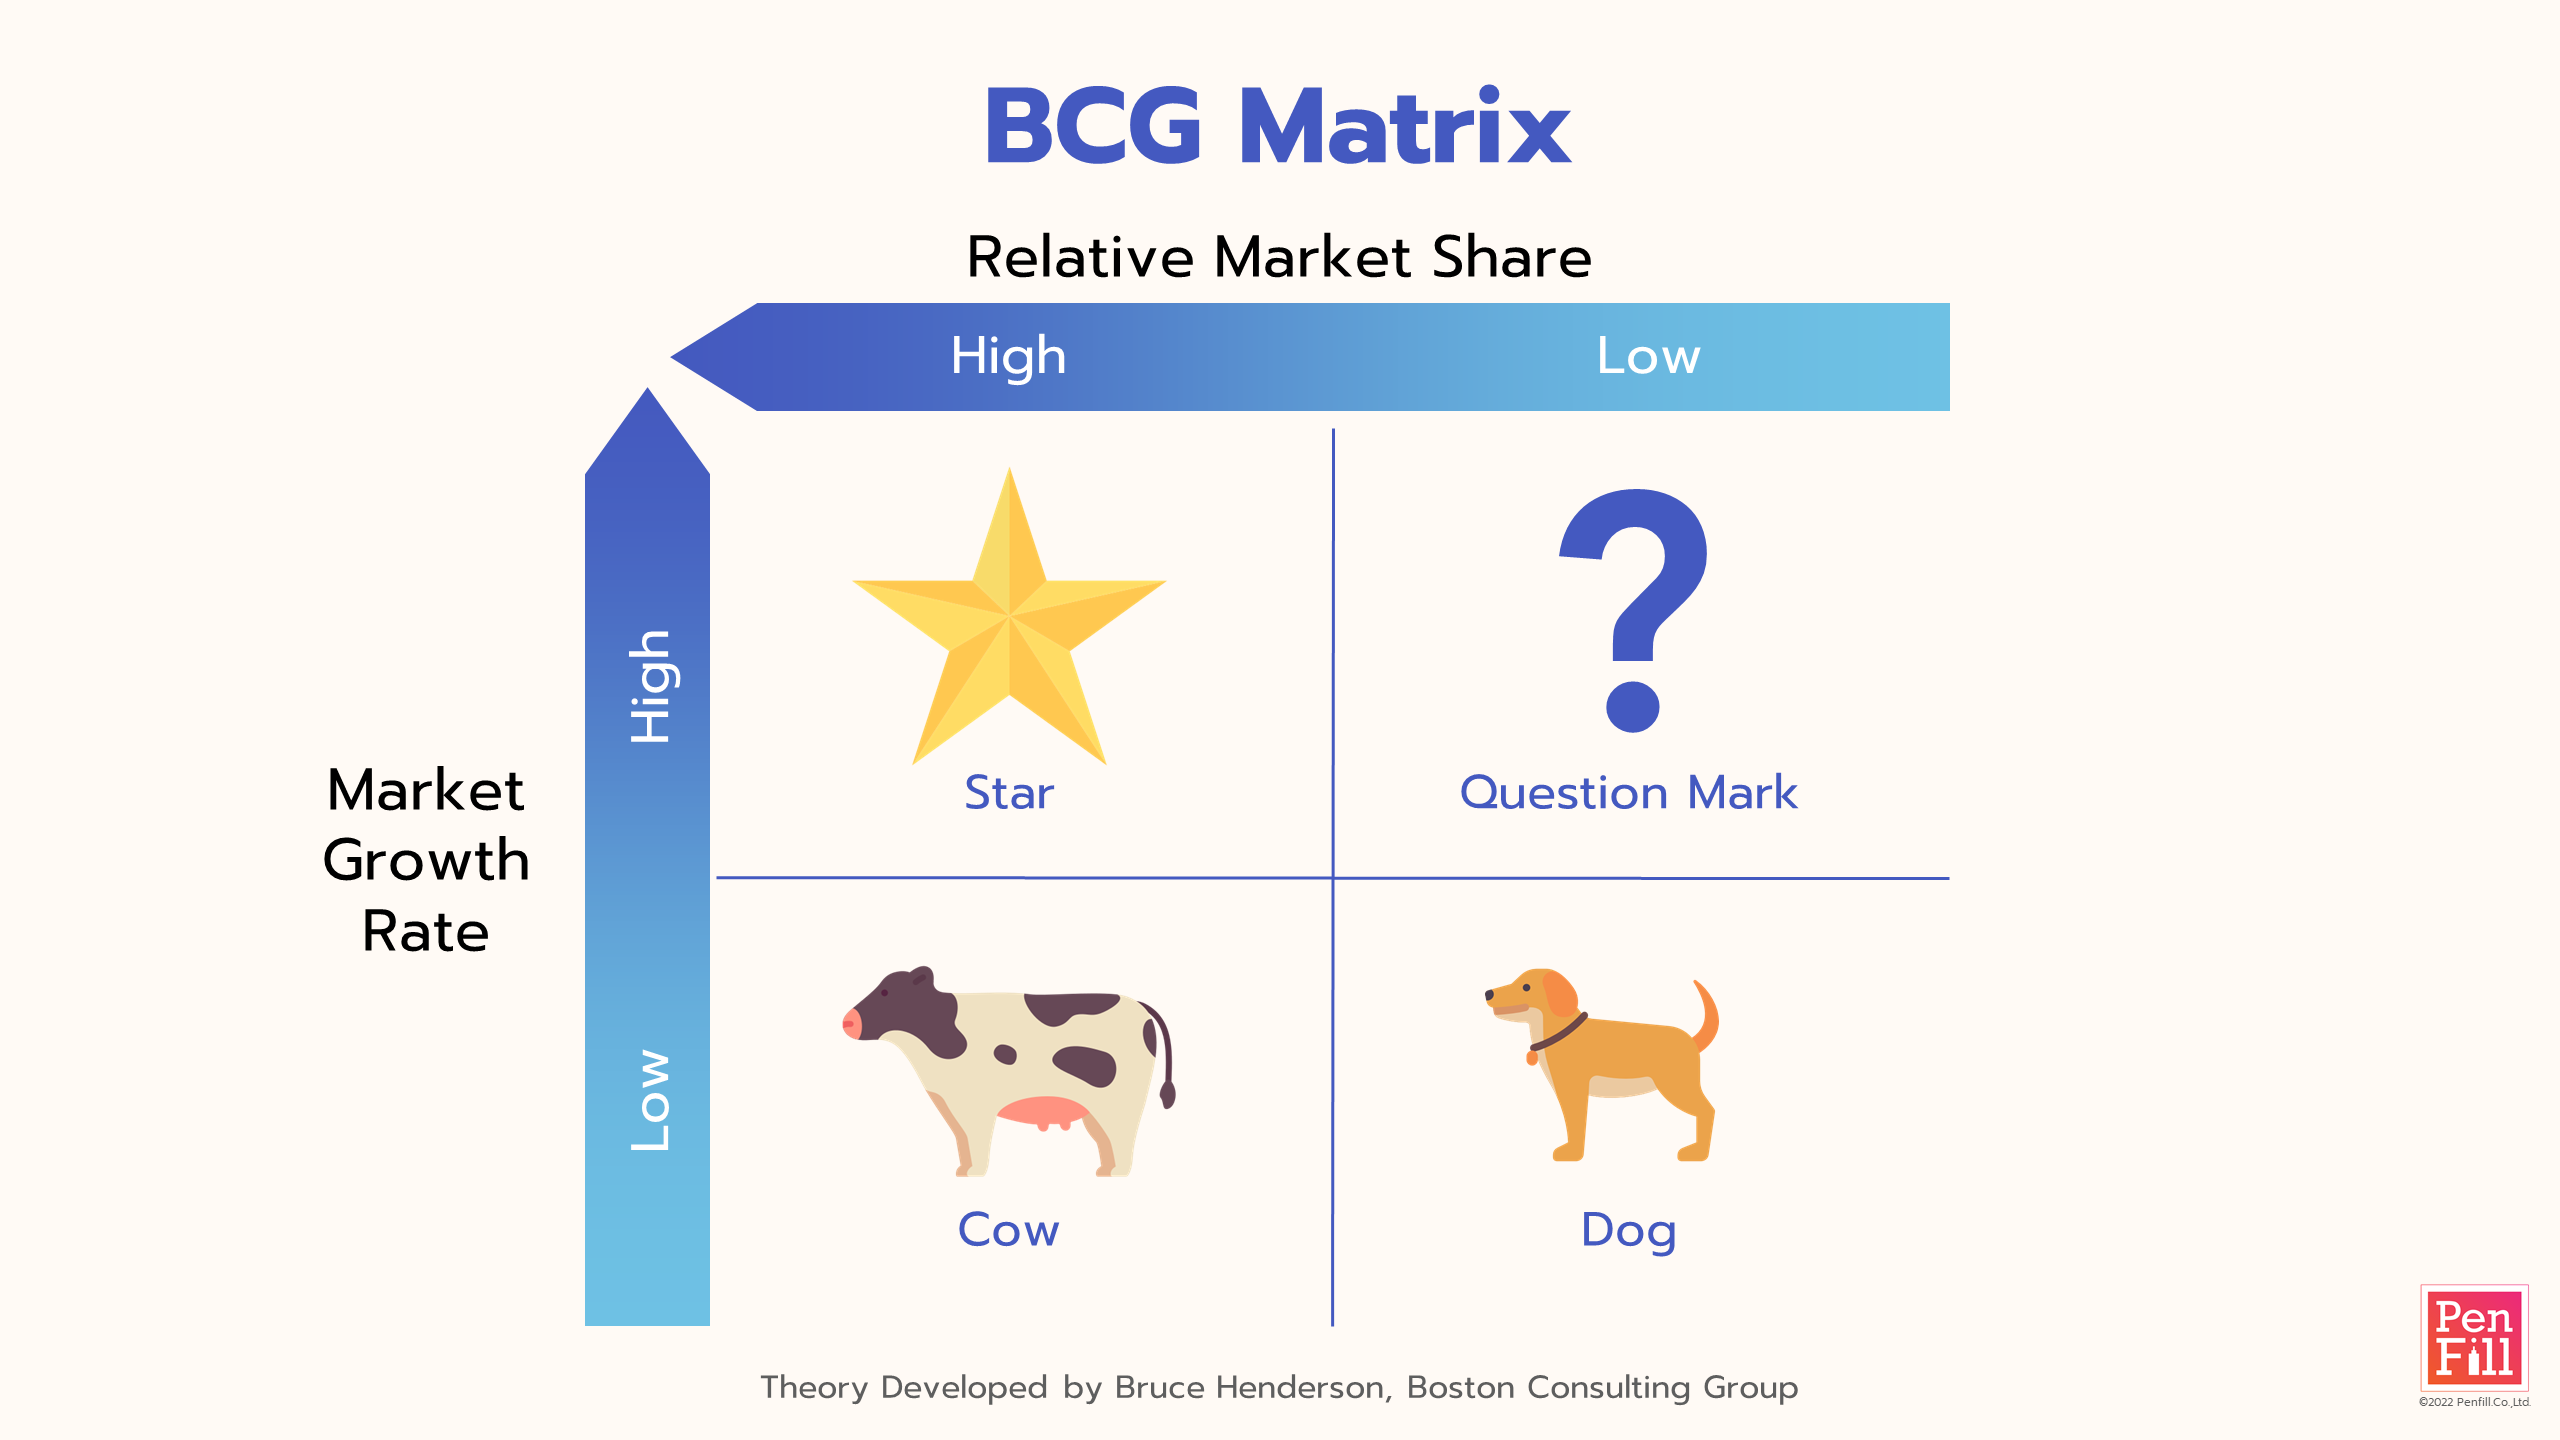 Competitive positioning by BCG Matrix